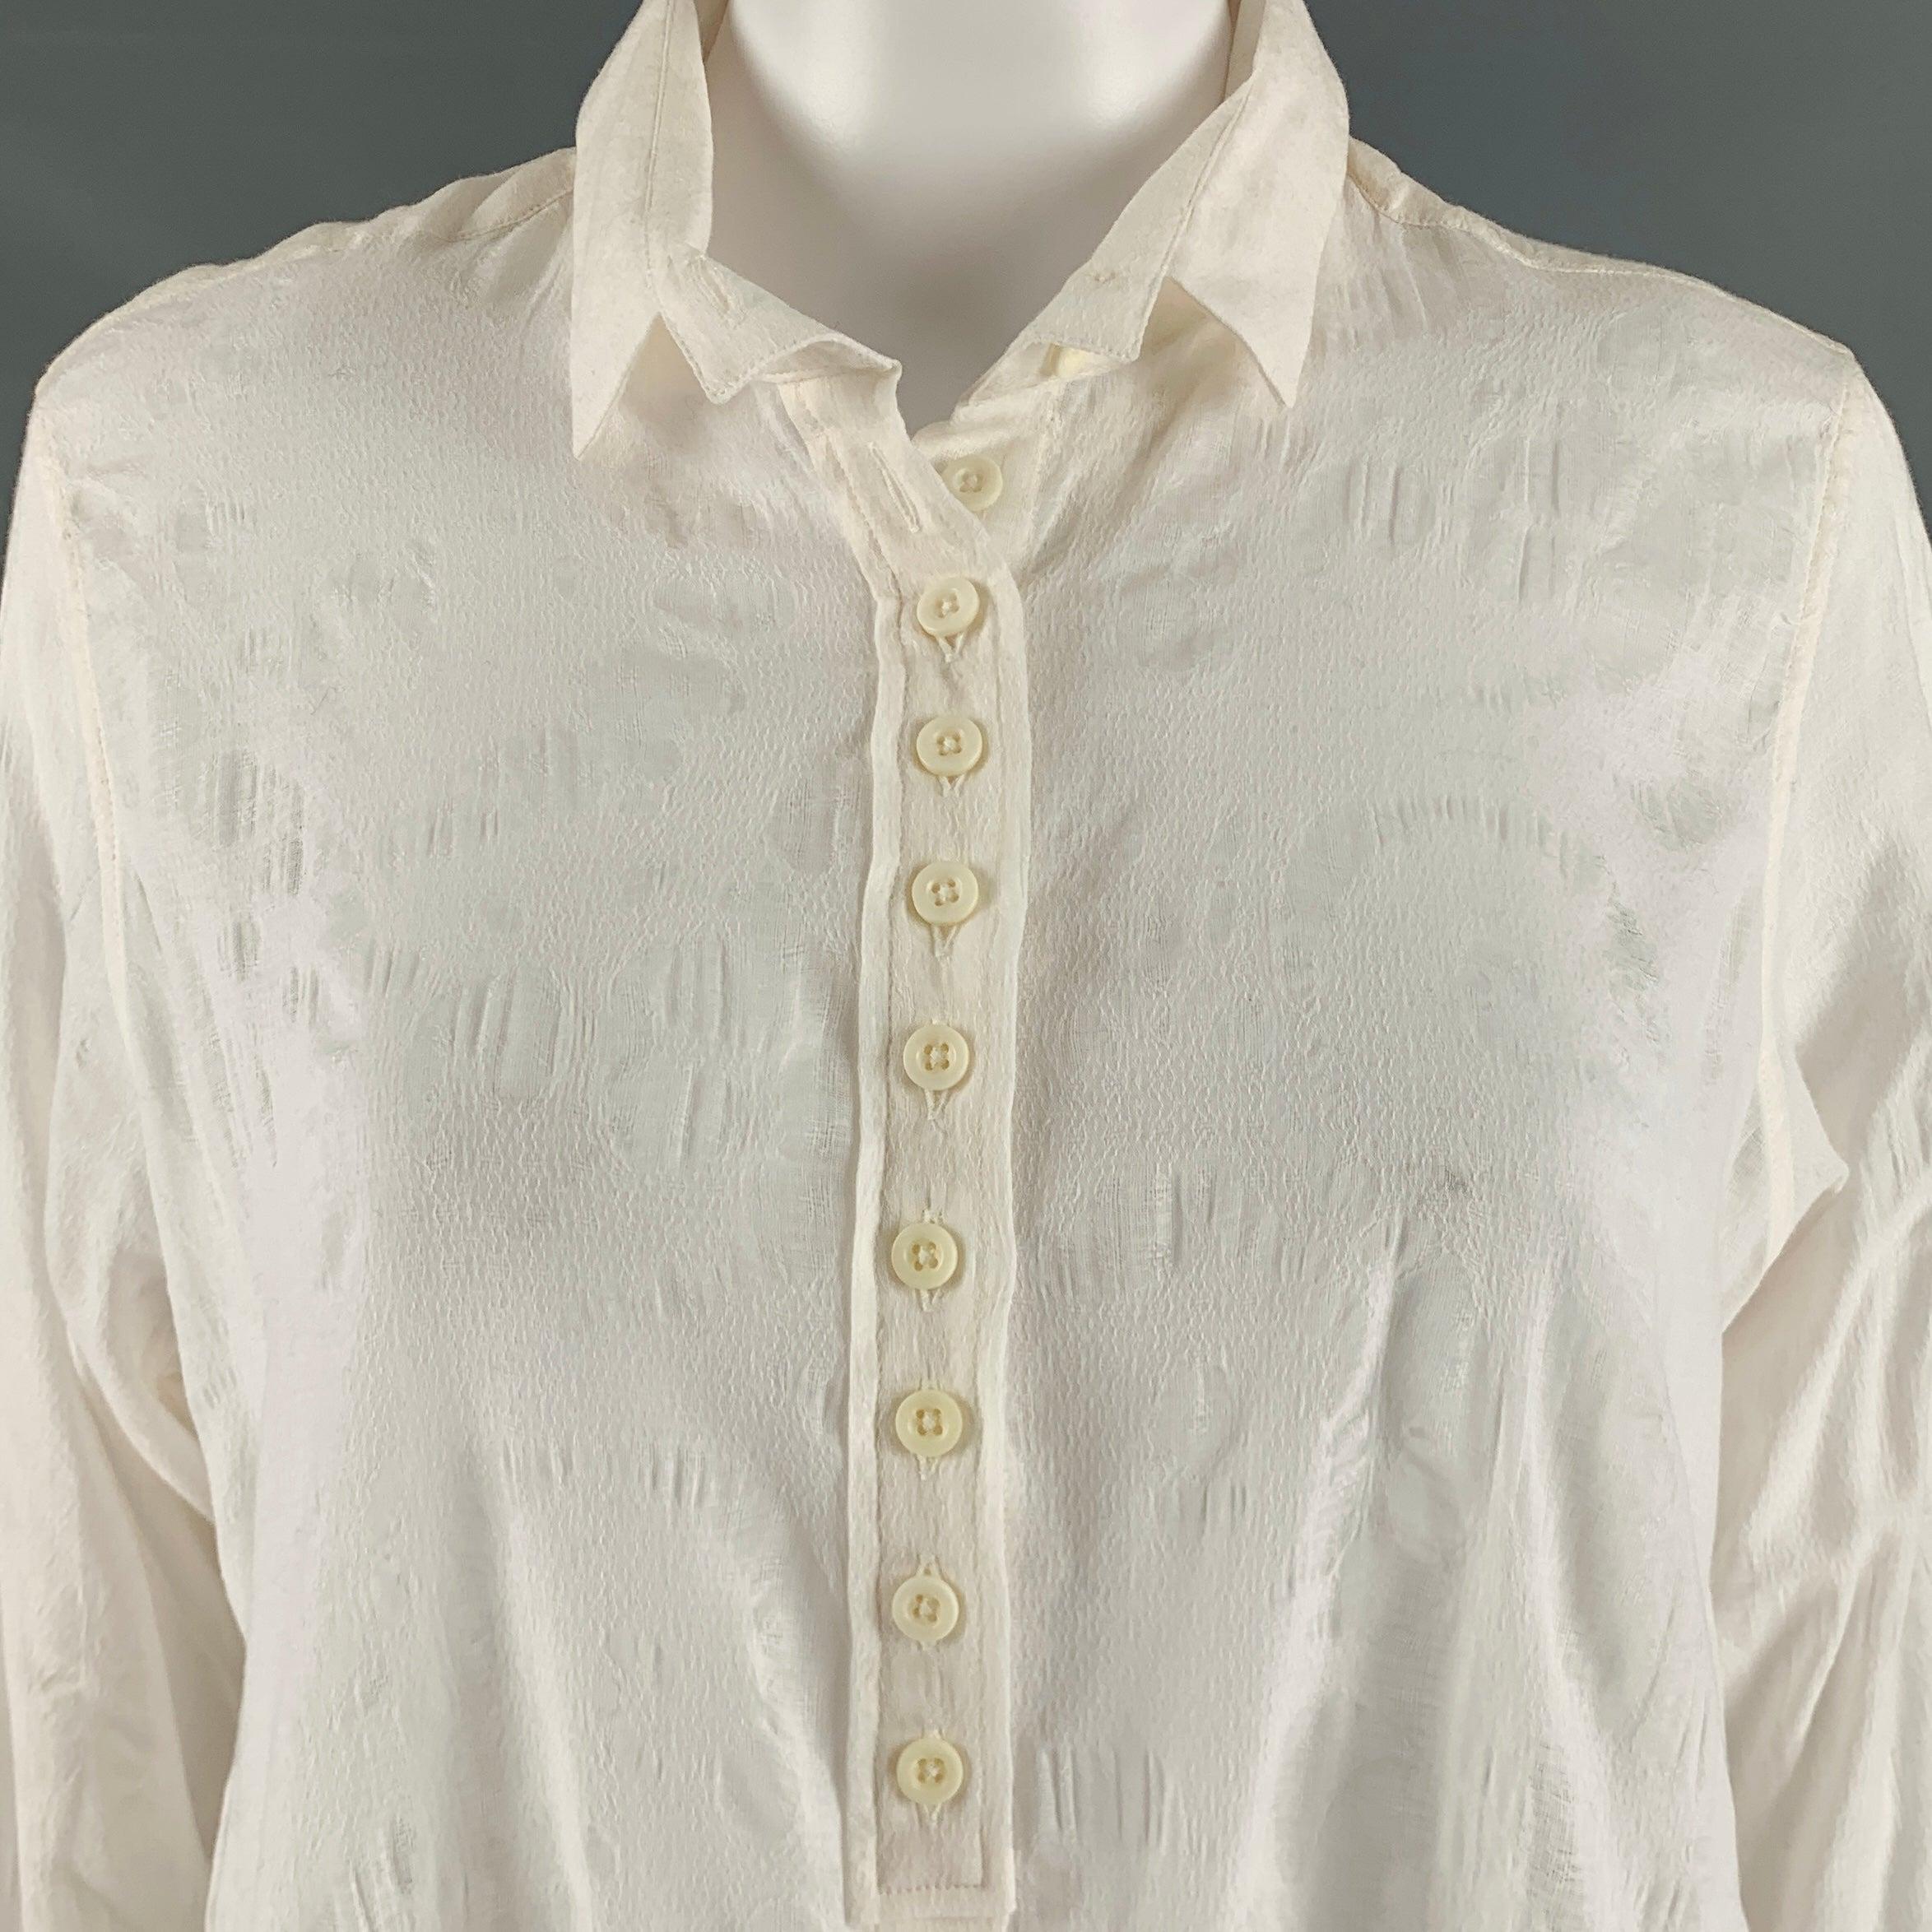 ANN DEMEULEMEESTER blouse
in a white cotton fabric featuring a textured design, long sleeves, side slits, and button closure with faux half placket. Made in Portugal.Very Good Pre-Owned Condition.
Minor mark on collar. 

Marked:   38 

Measurements: